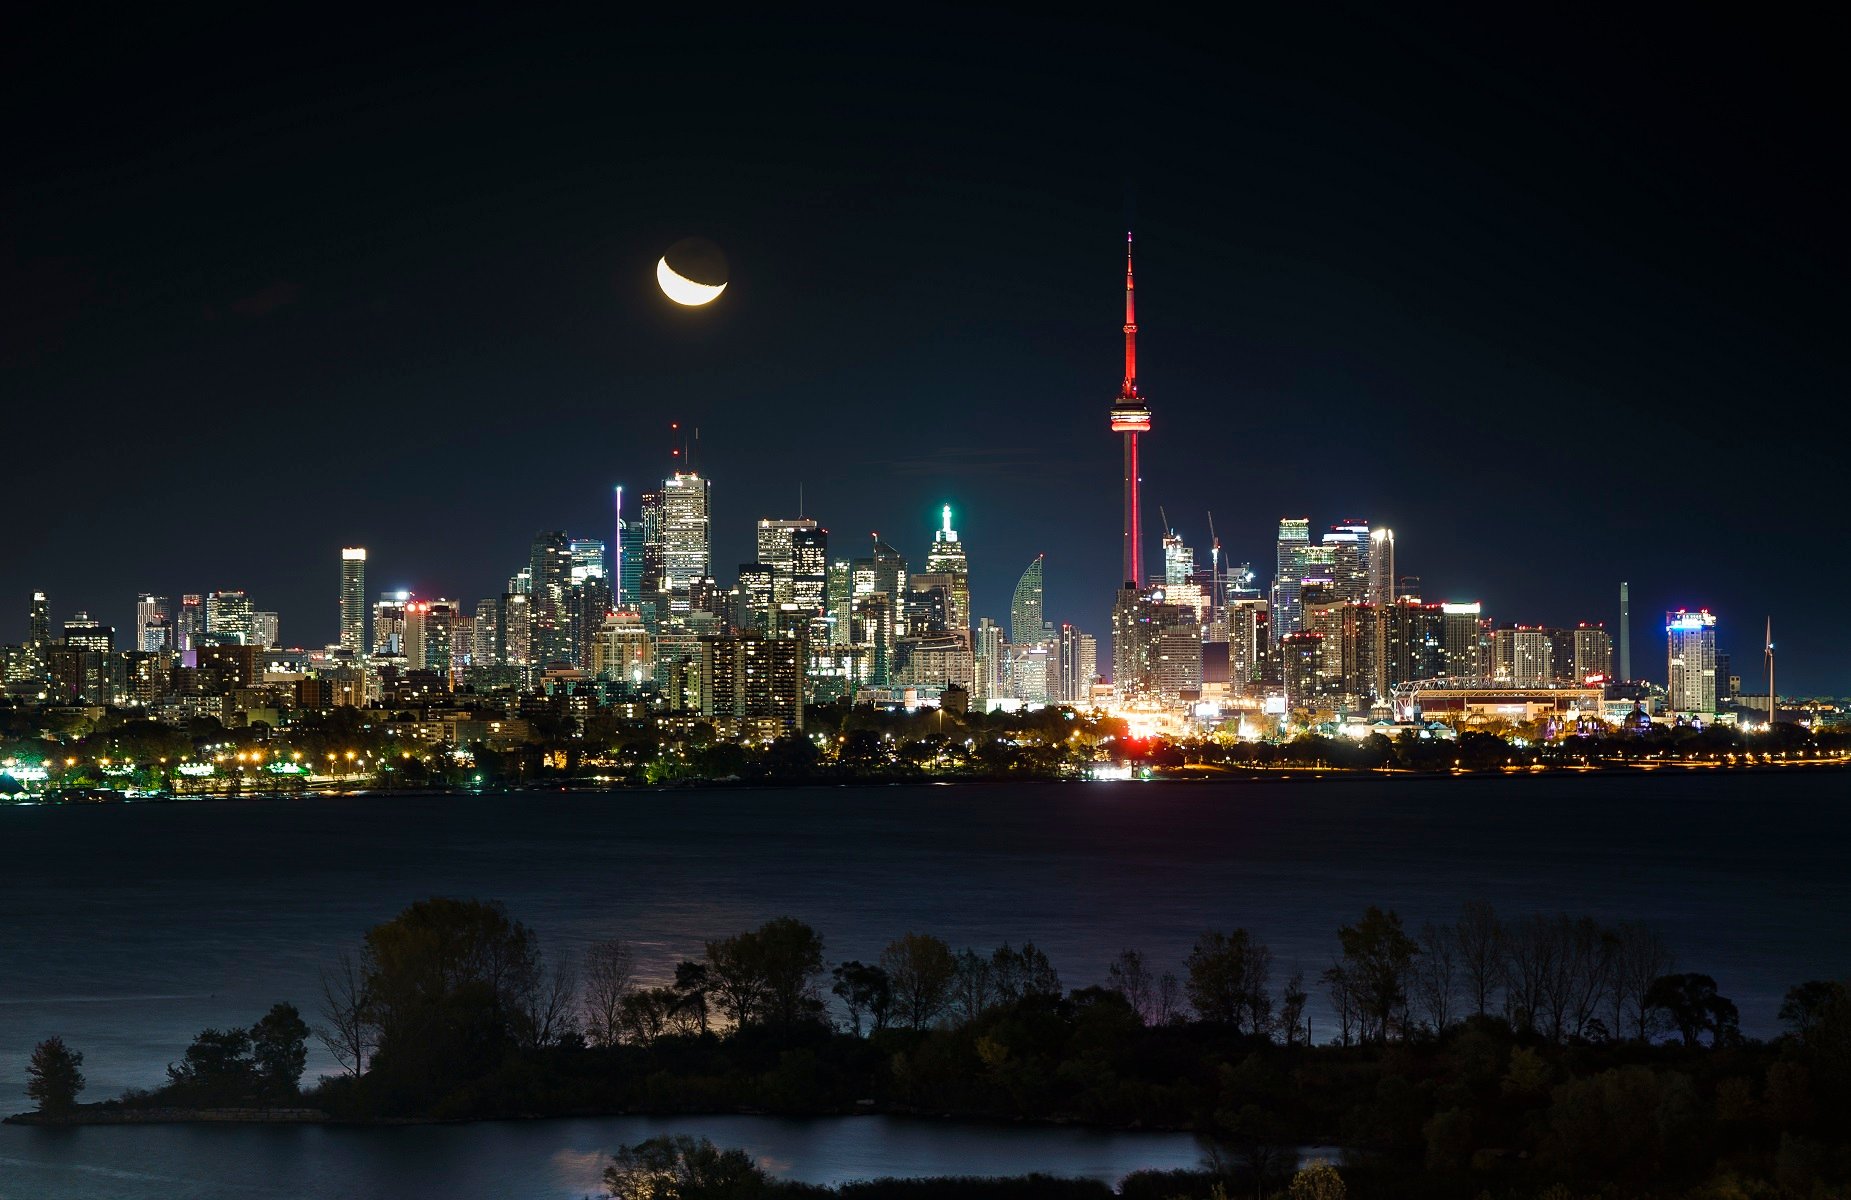 The moon rises behind the CN Tower and skyline in Toronto on October 23, 2019